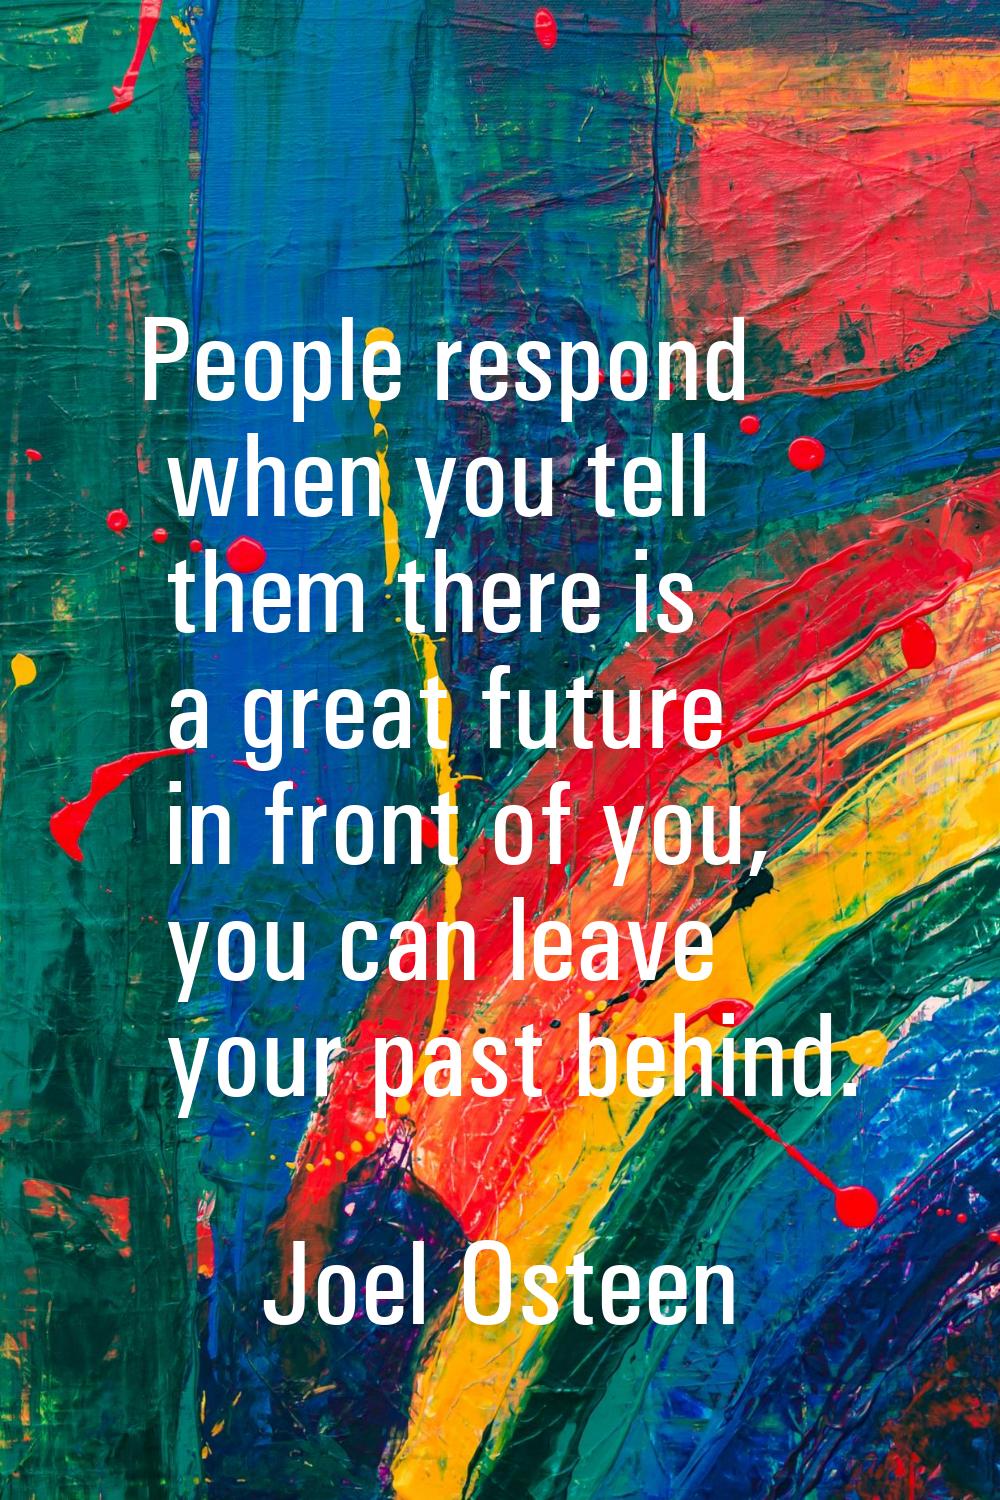 People respond when you tell them there is a great future in front of you, you can leave your past 